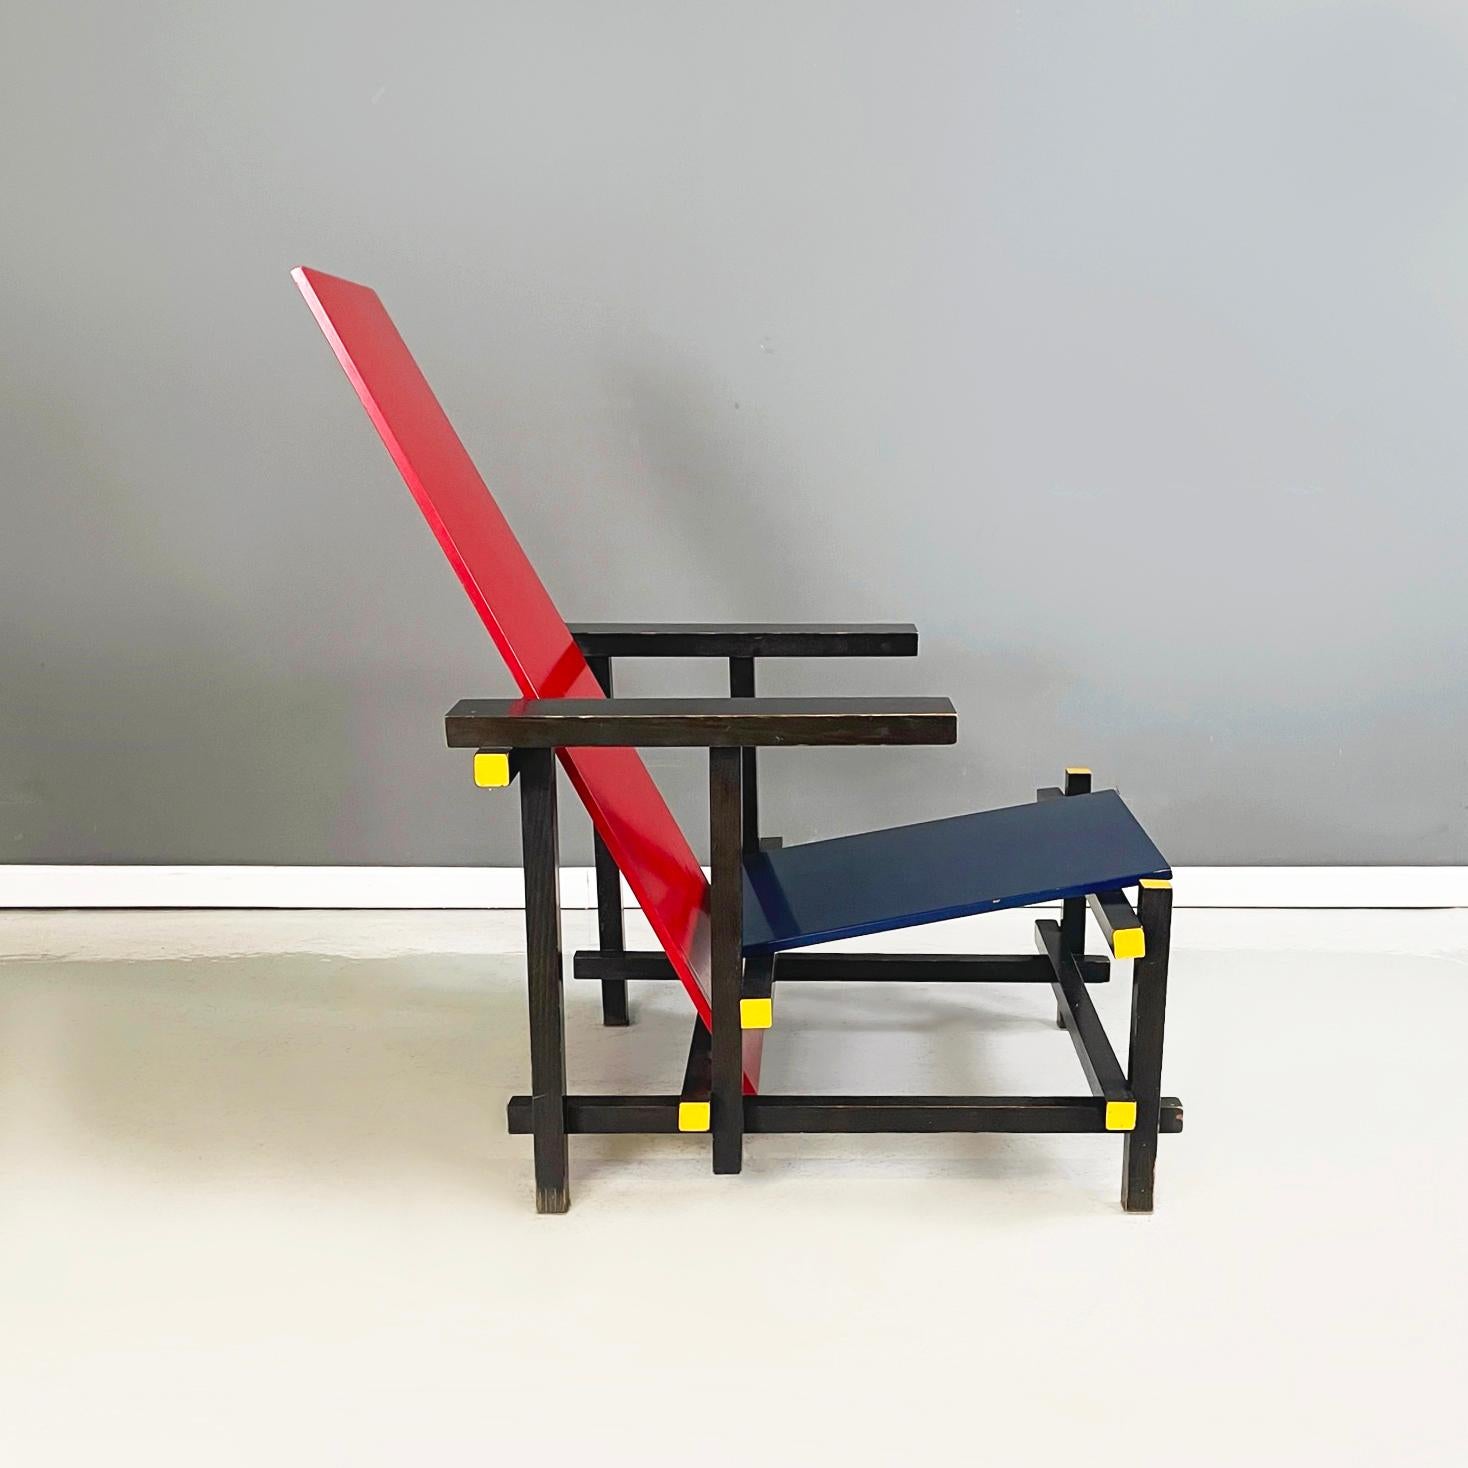 Late 20th Century Italian Bauhaus Armchair Red and Blue by Rietveld 1st production Cassina 1971 For Sale